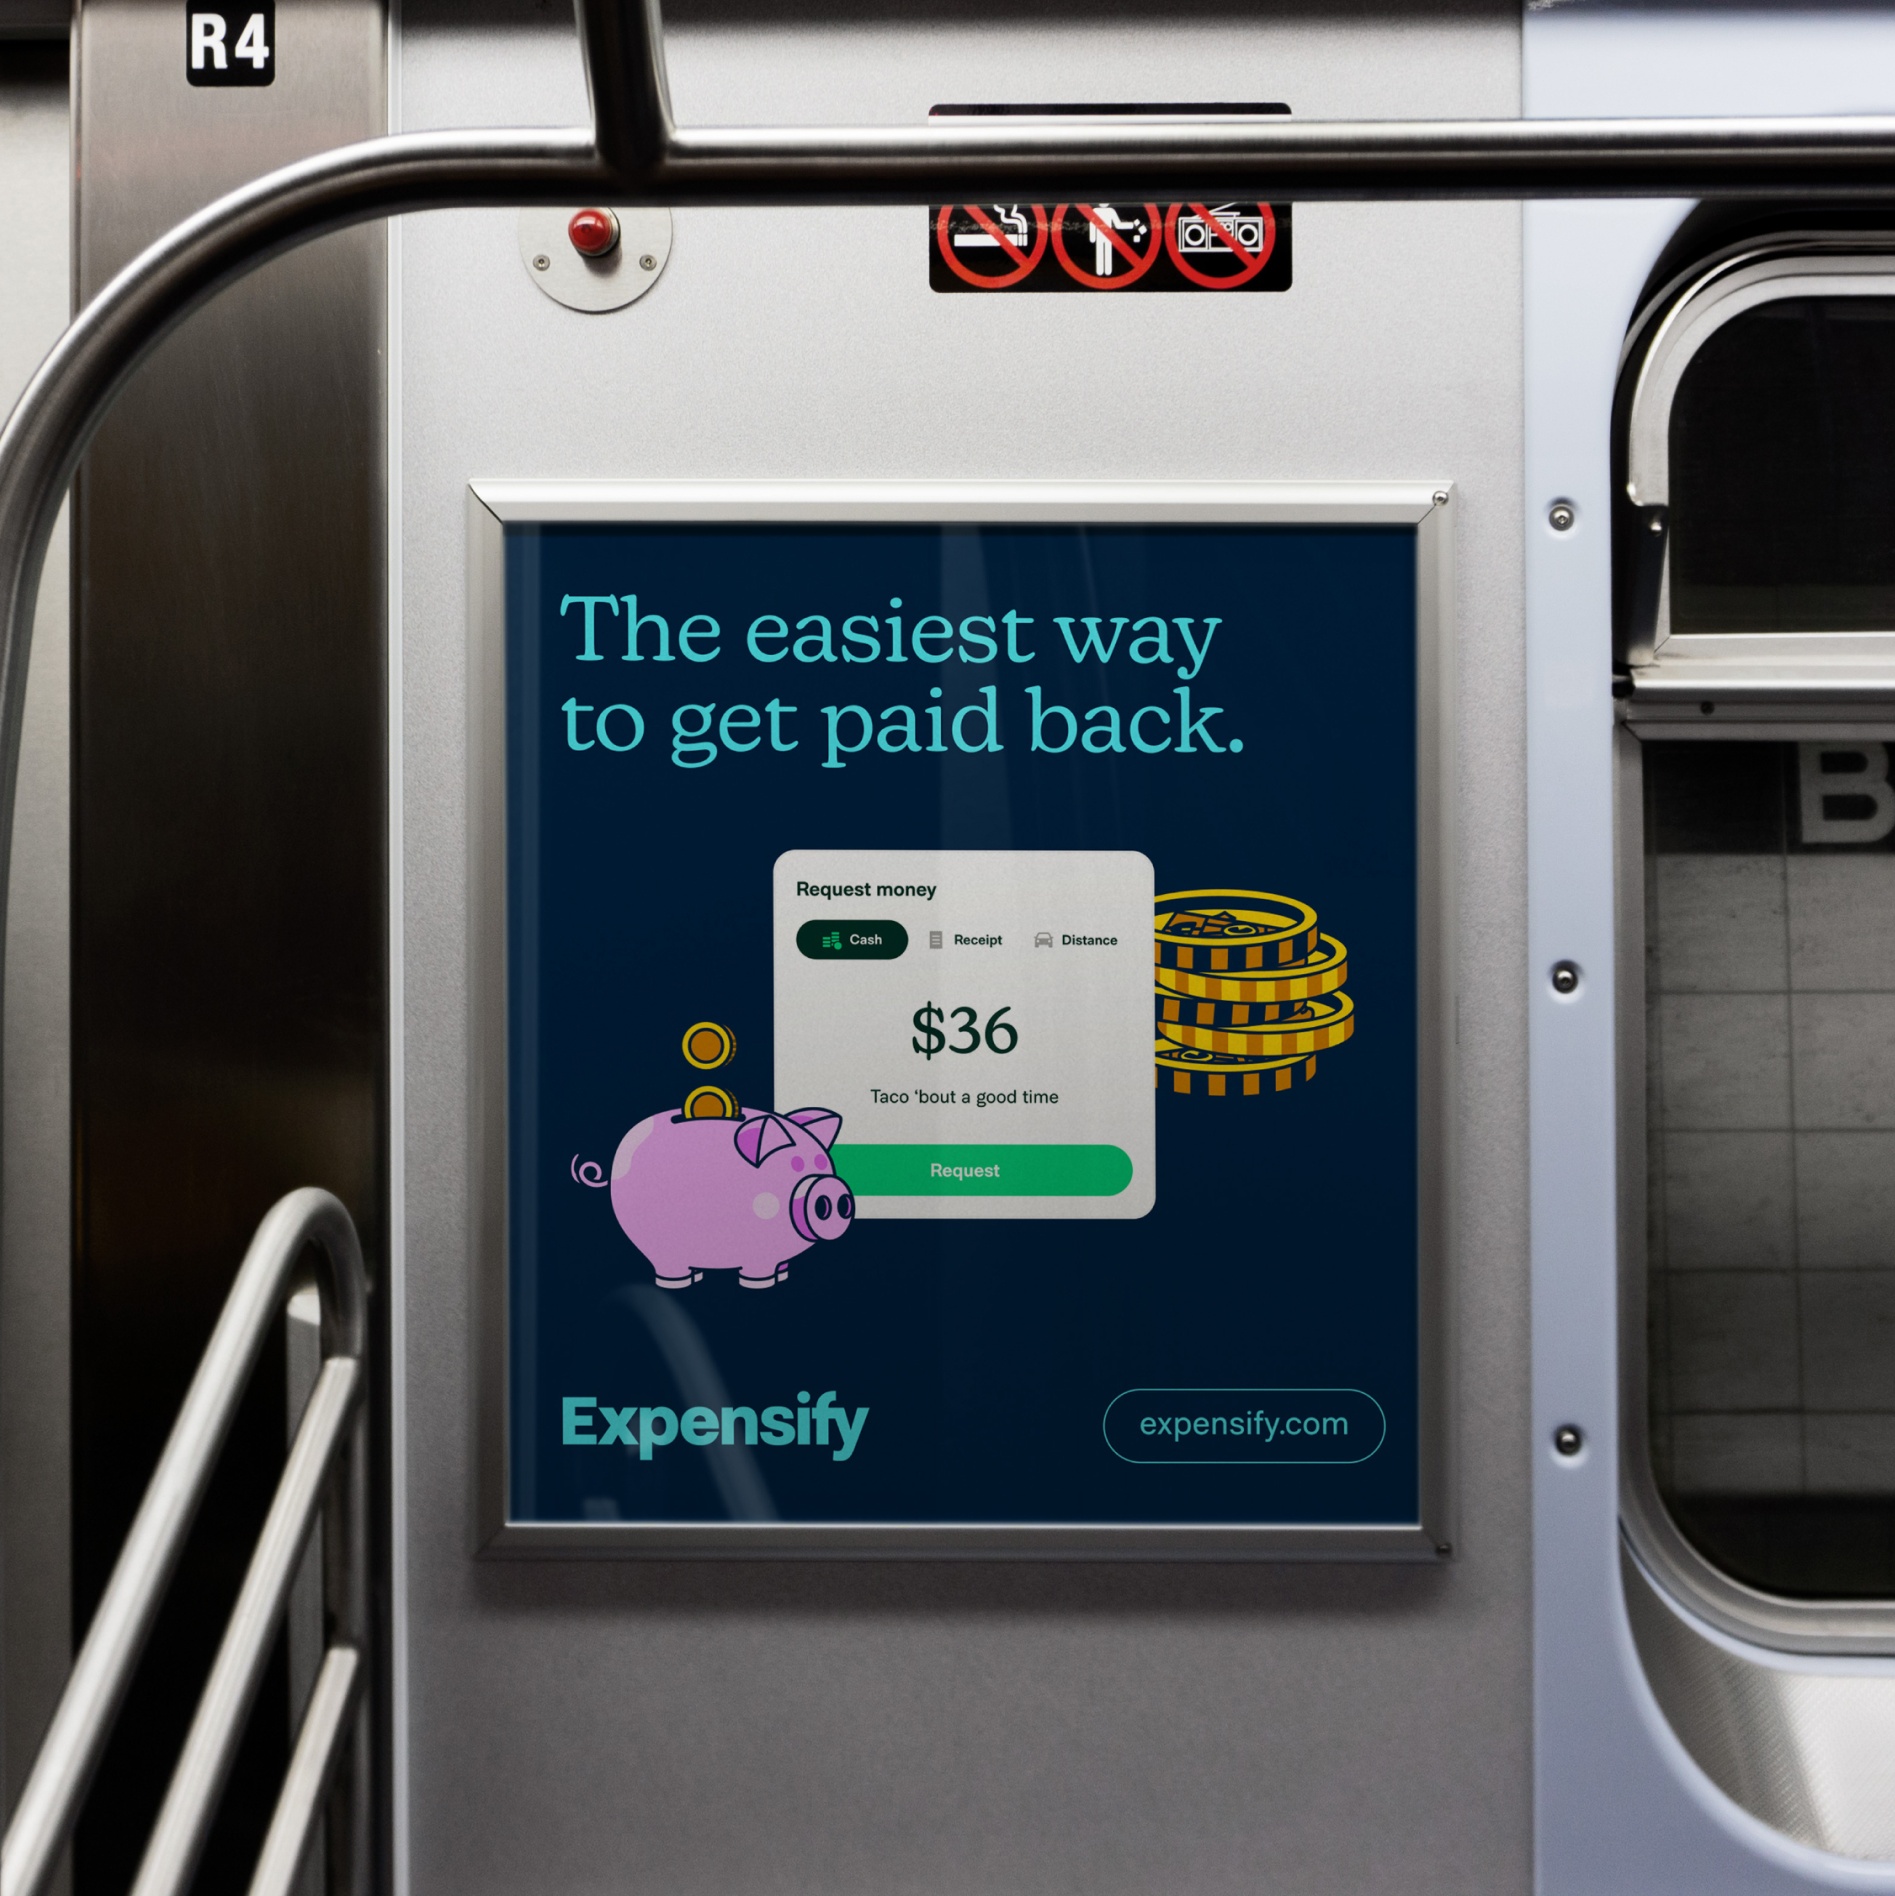 An example of a Subway ad fo Expensify.